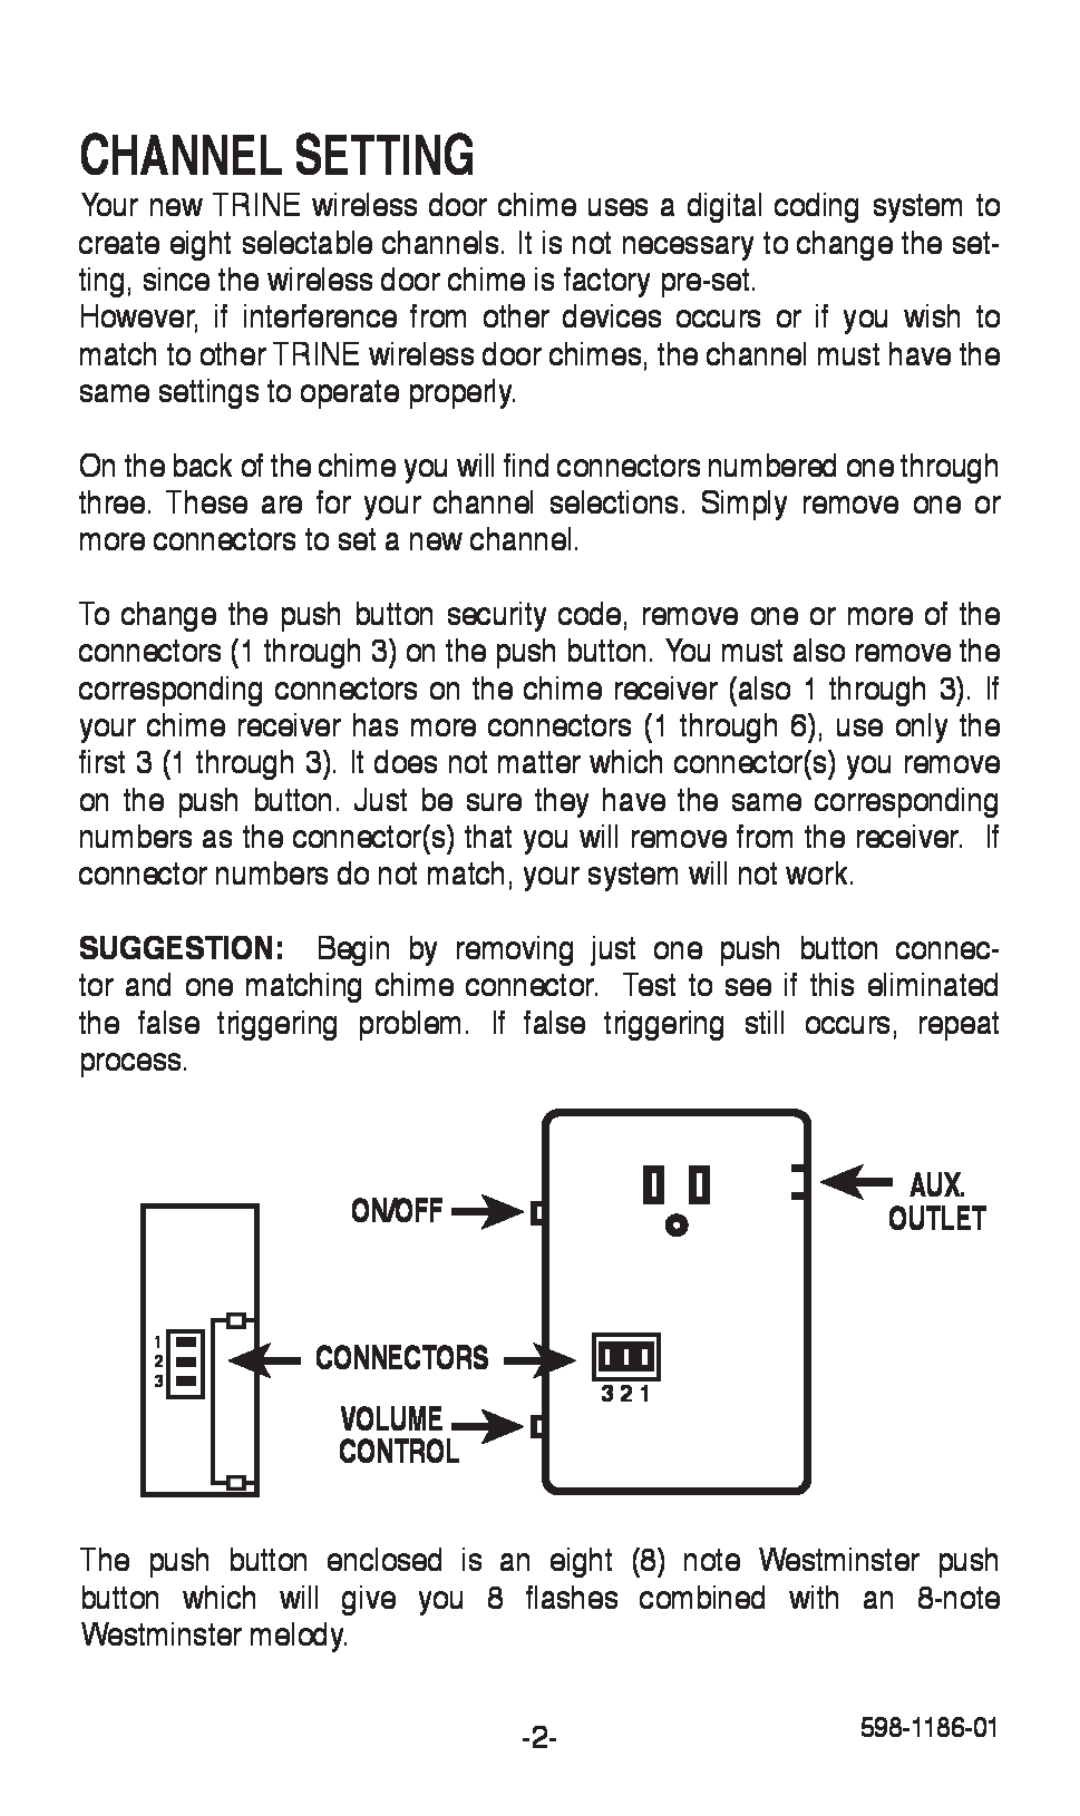 Desa 598-1186-01 installation instructions Channel Setting, On/Off, Connectors, Volume, Control 